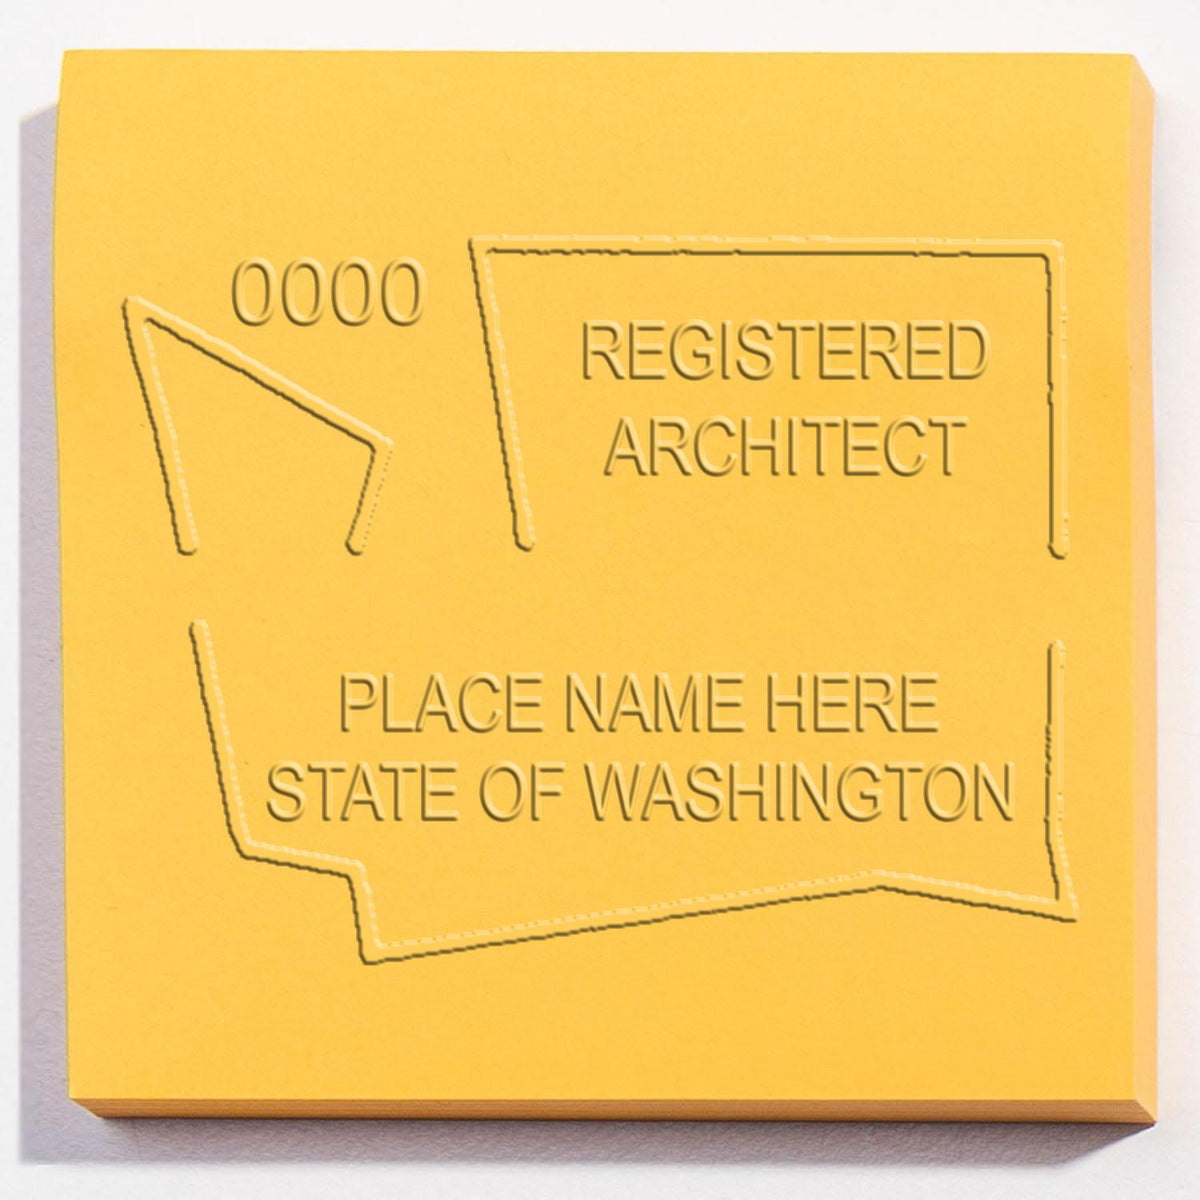 A stamped impression of the Washington Desk Architect Embossing Seal in this stylish lifestyle photo, setting the tone for a unique and personalized product.